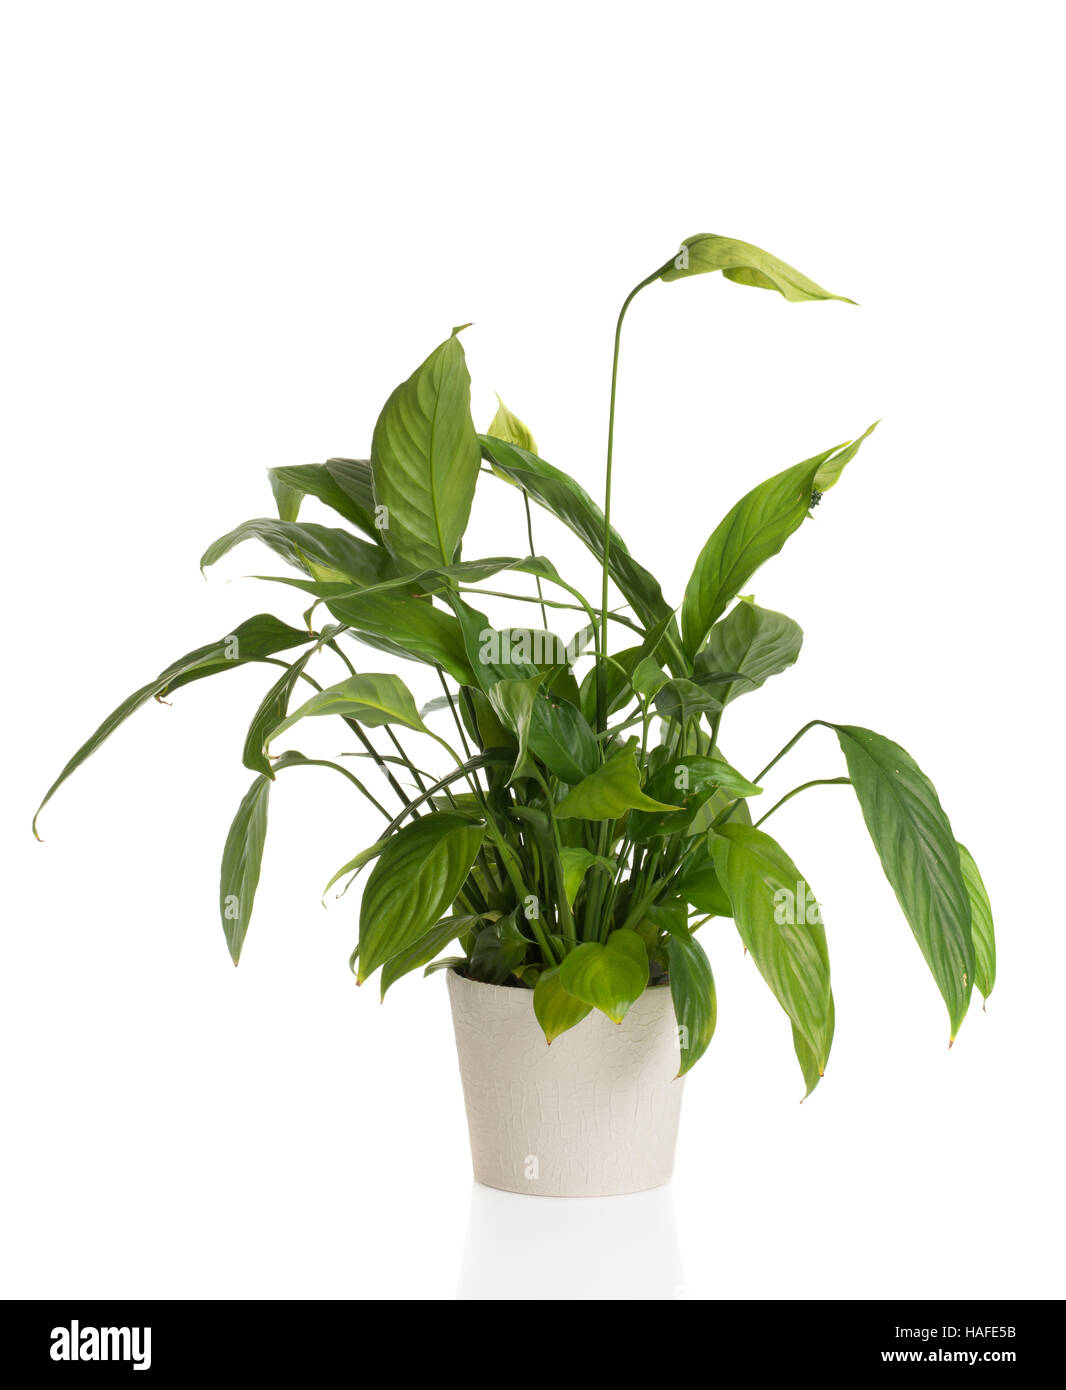 High resolution image of an African Peace Lily on a white background Stock Photo